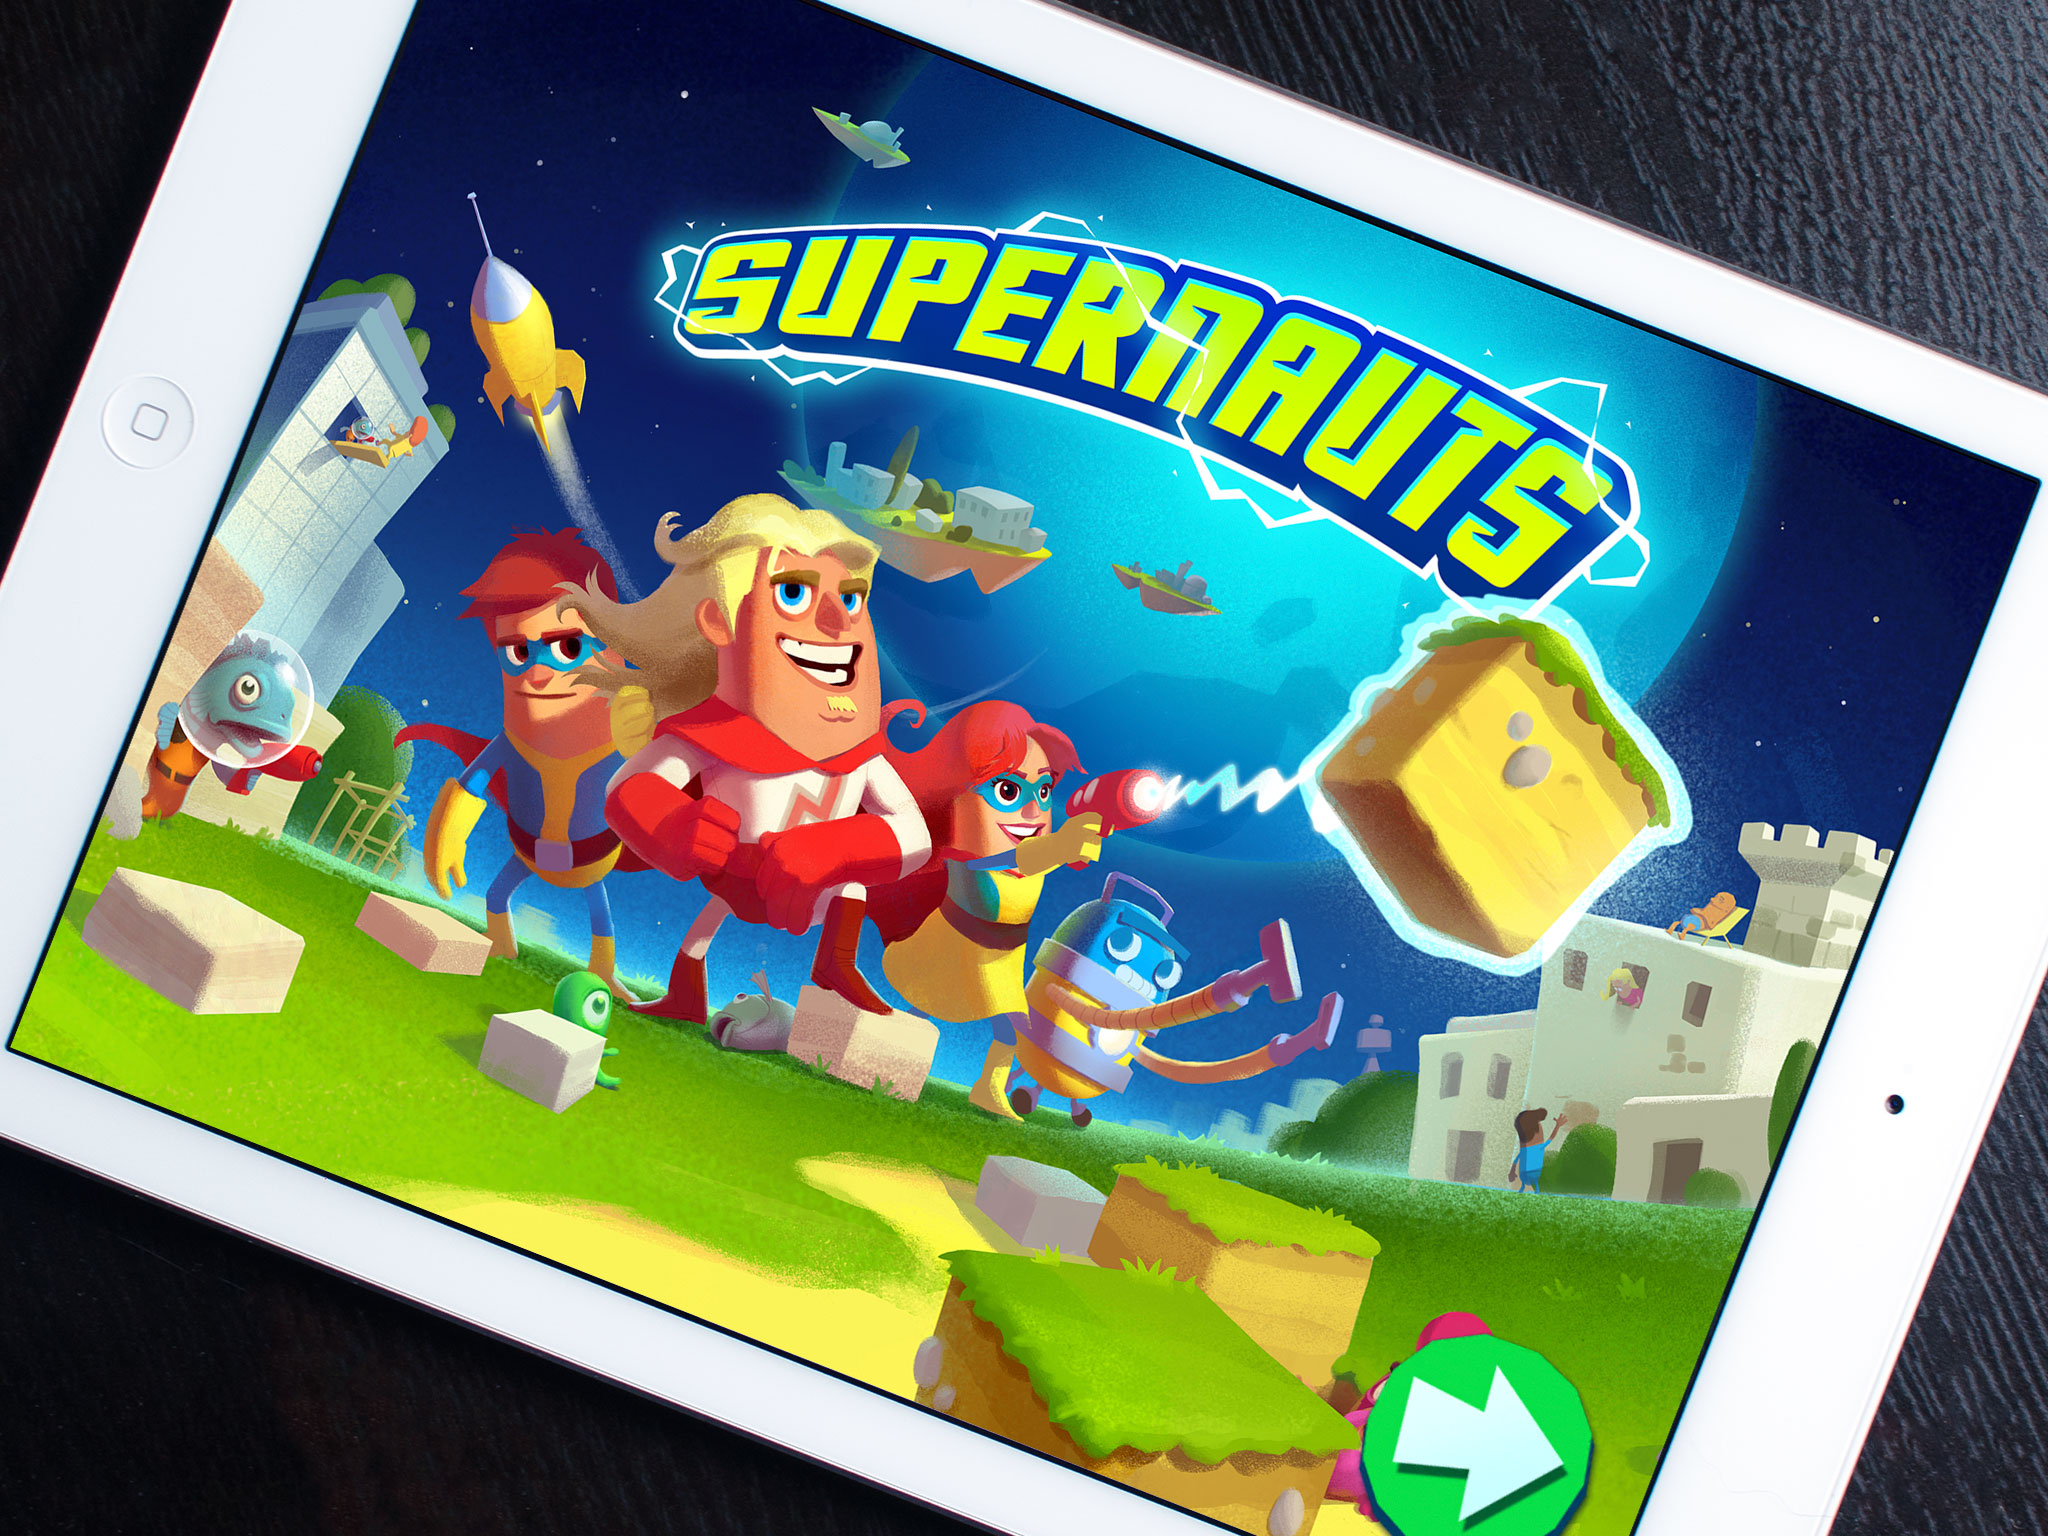 Supernauts: Top 10 tips, hints, and cheats you need to know!